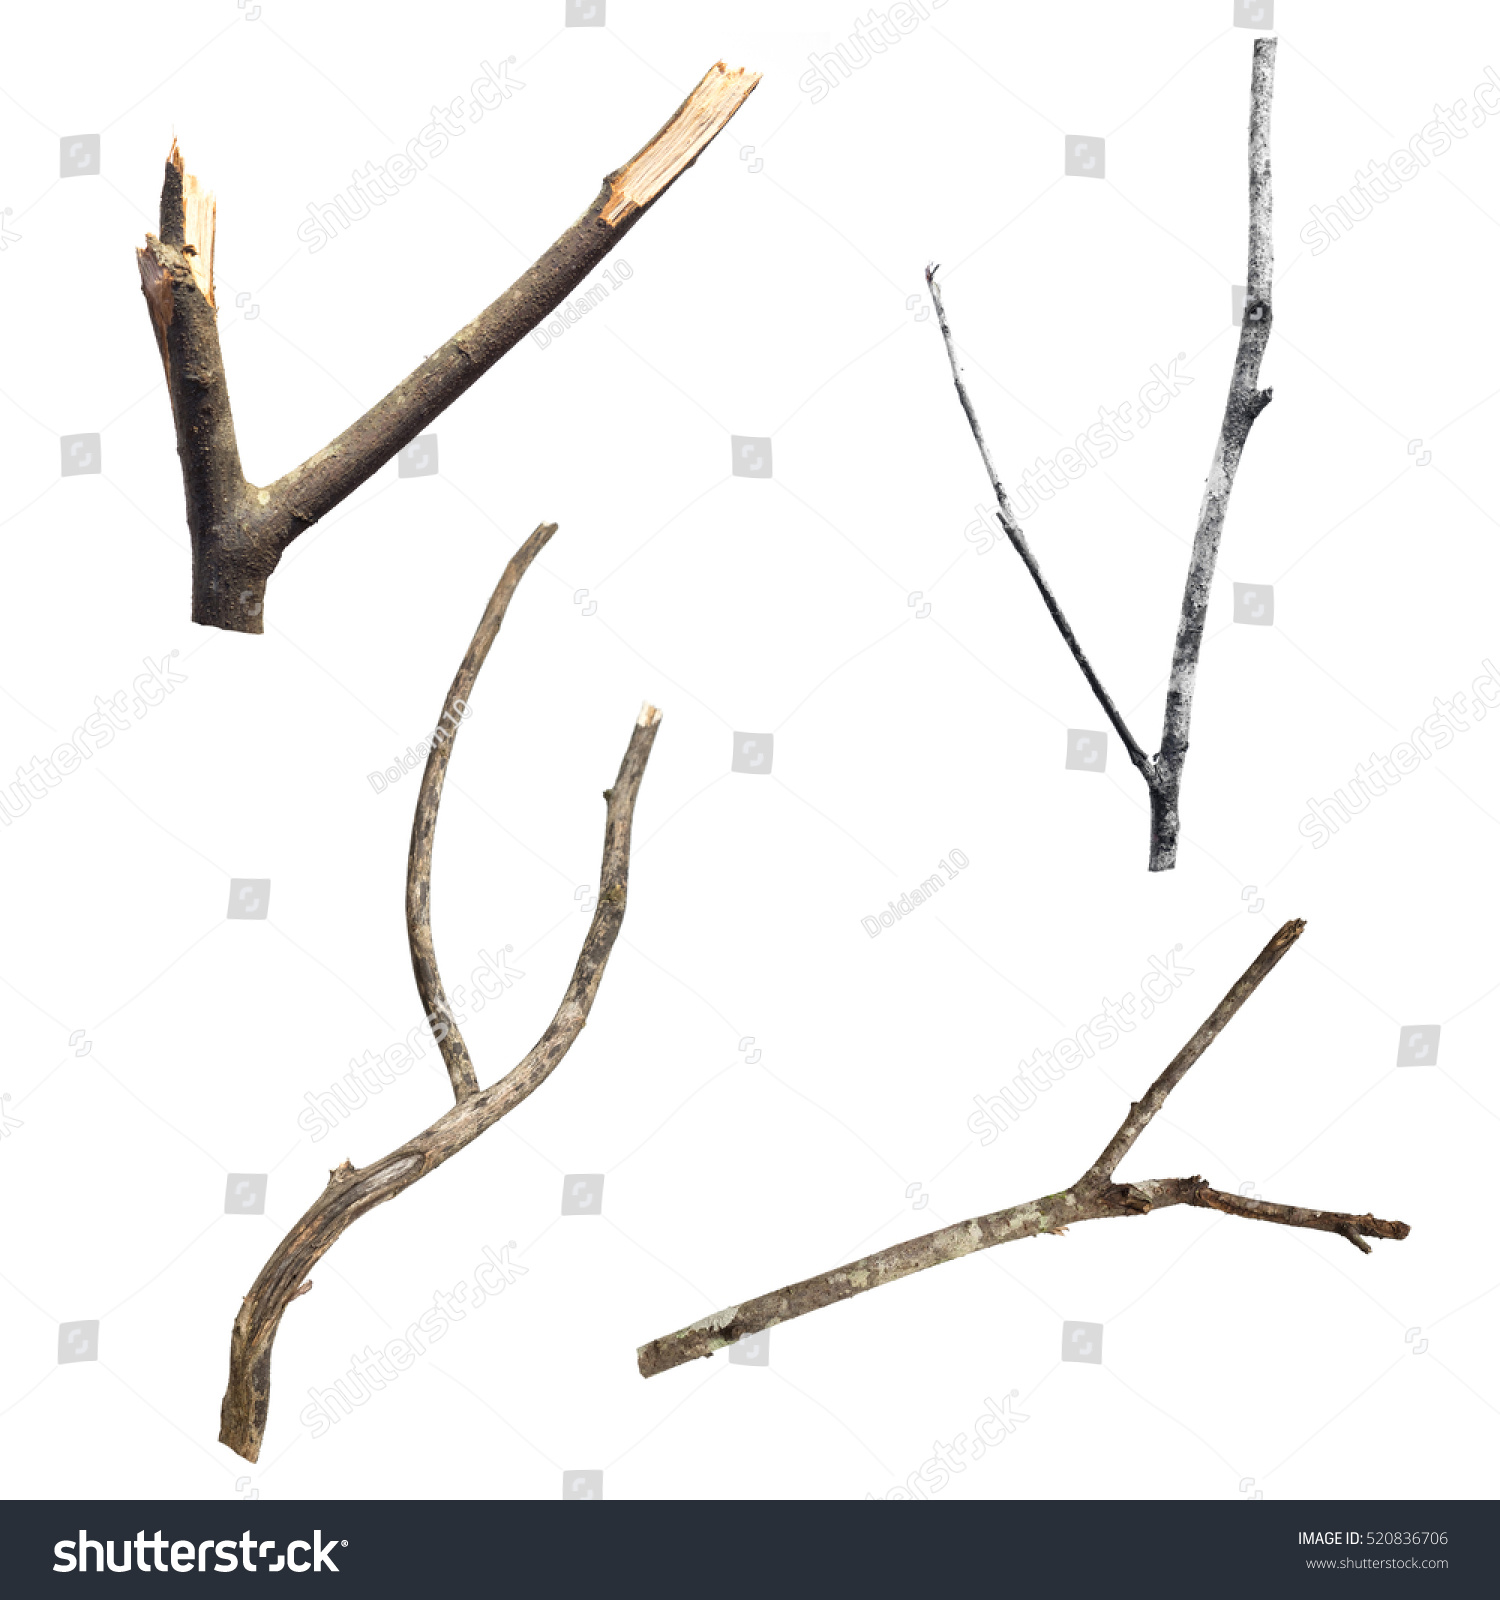 Set of dry tree branch, isolated on white background #520836706